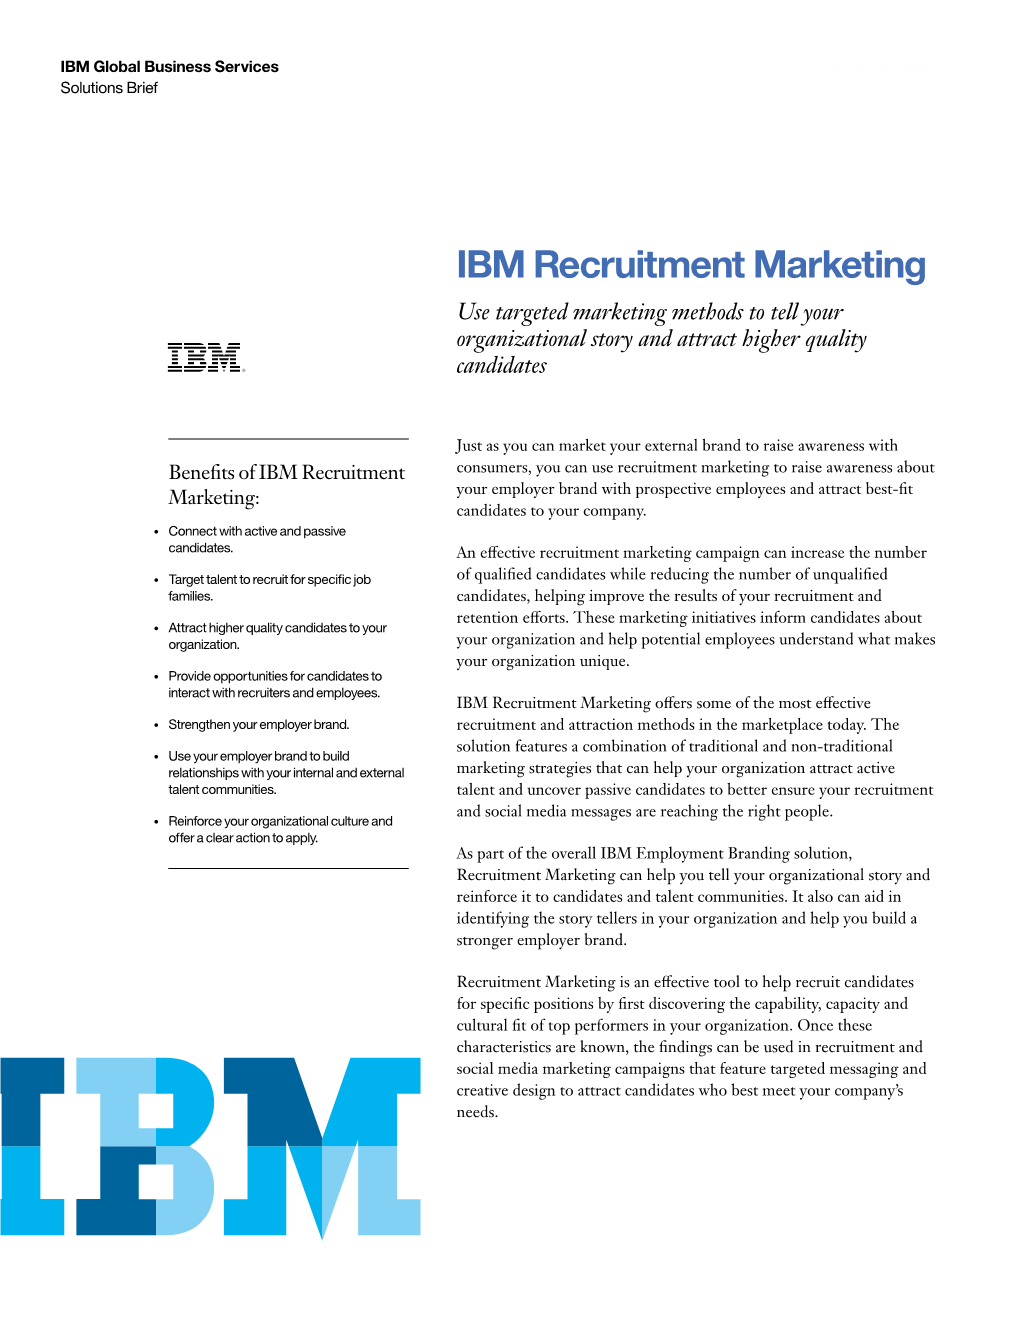 IBM Recruitment Marketing Use Targeted Marketing Methods to Tell Your Organizational Story and Attract Higher Quality Candidates